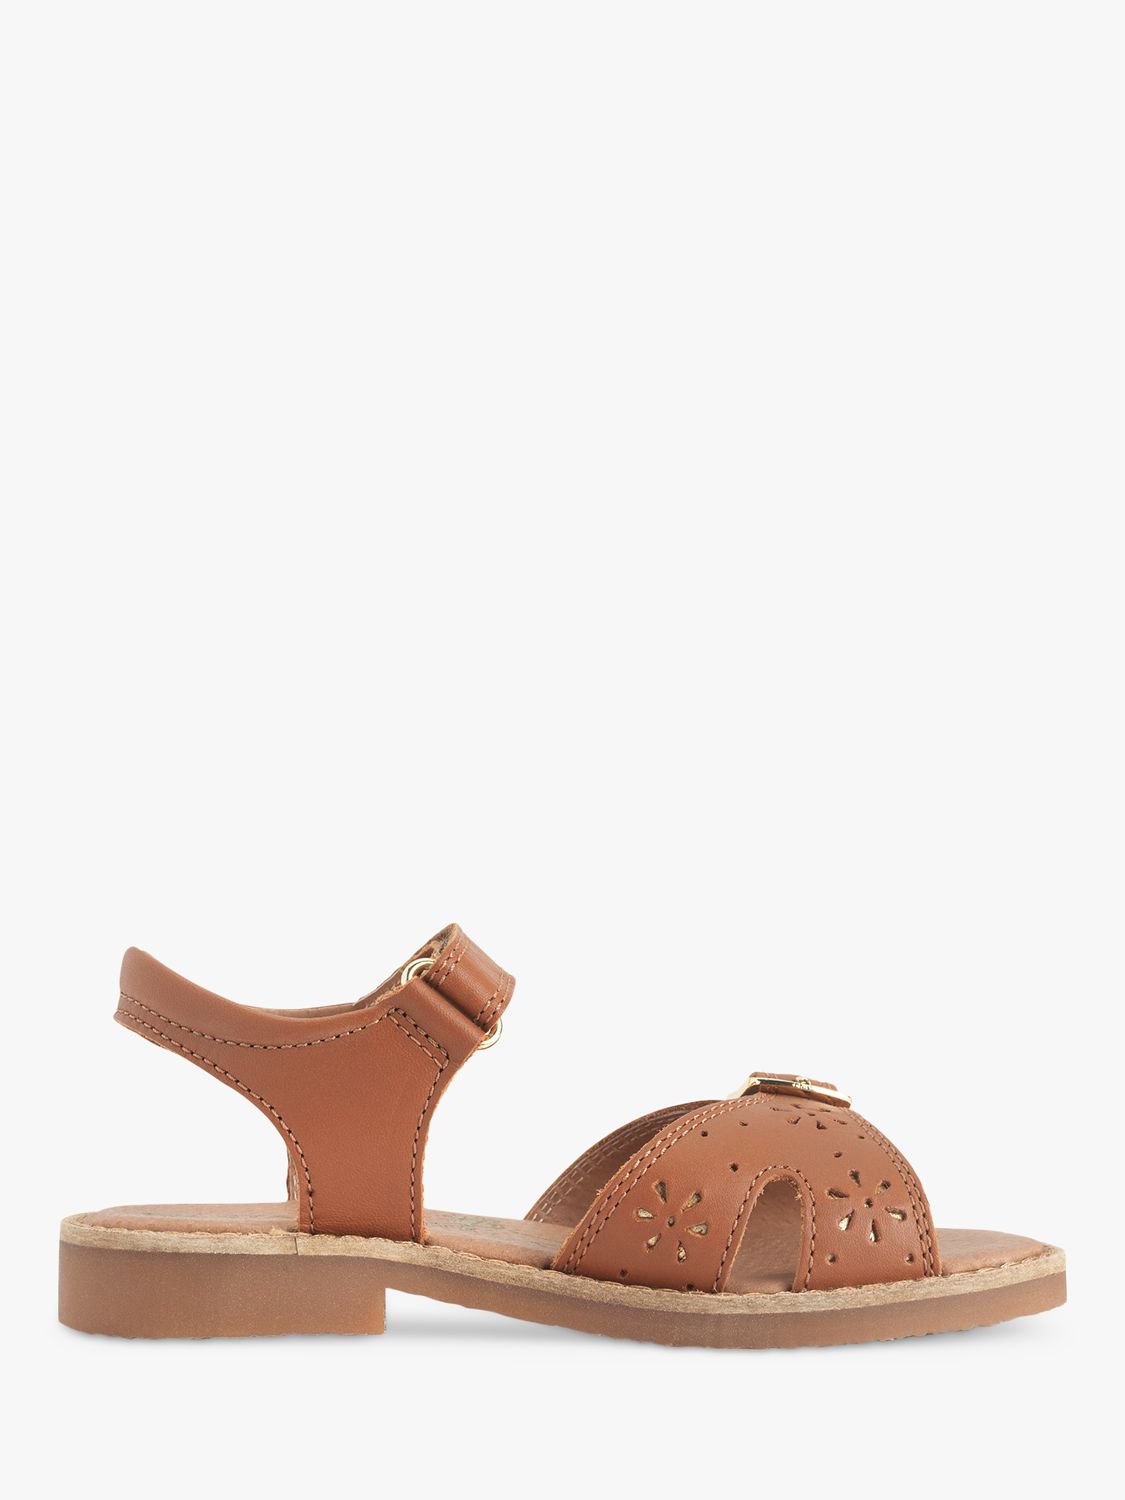 Start-Rite Kids' Holiday Leather Sandals, Tan Leather, 7F Jnr